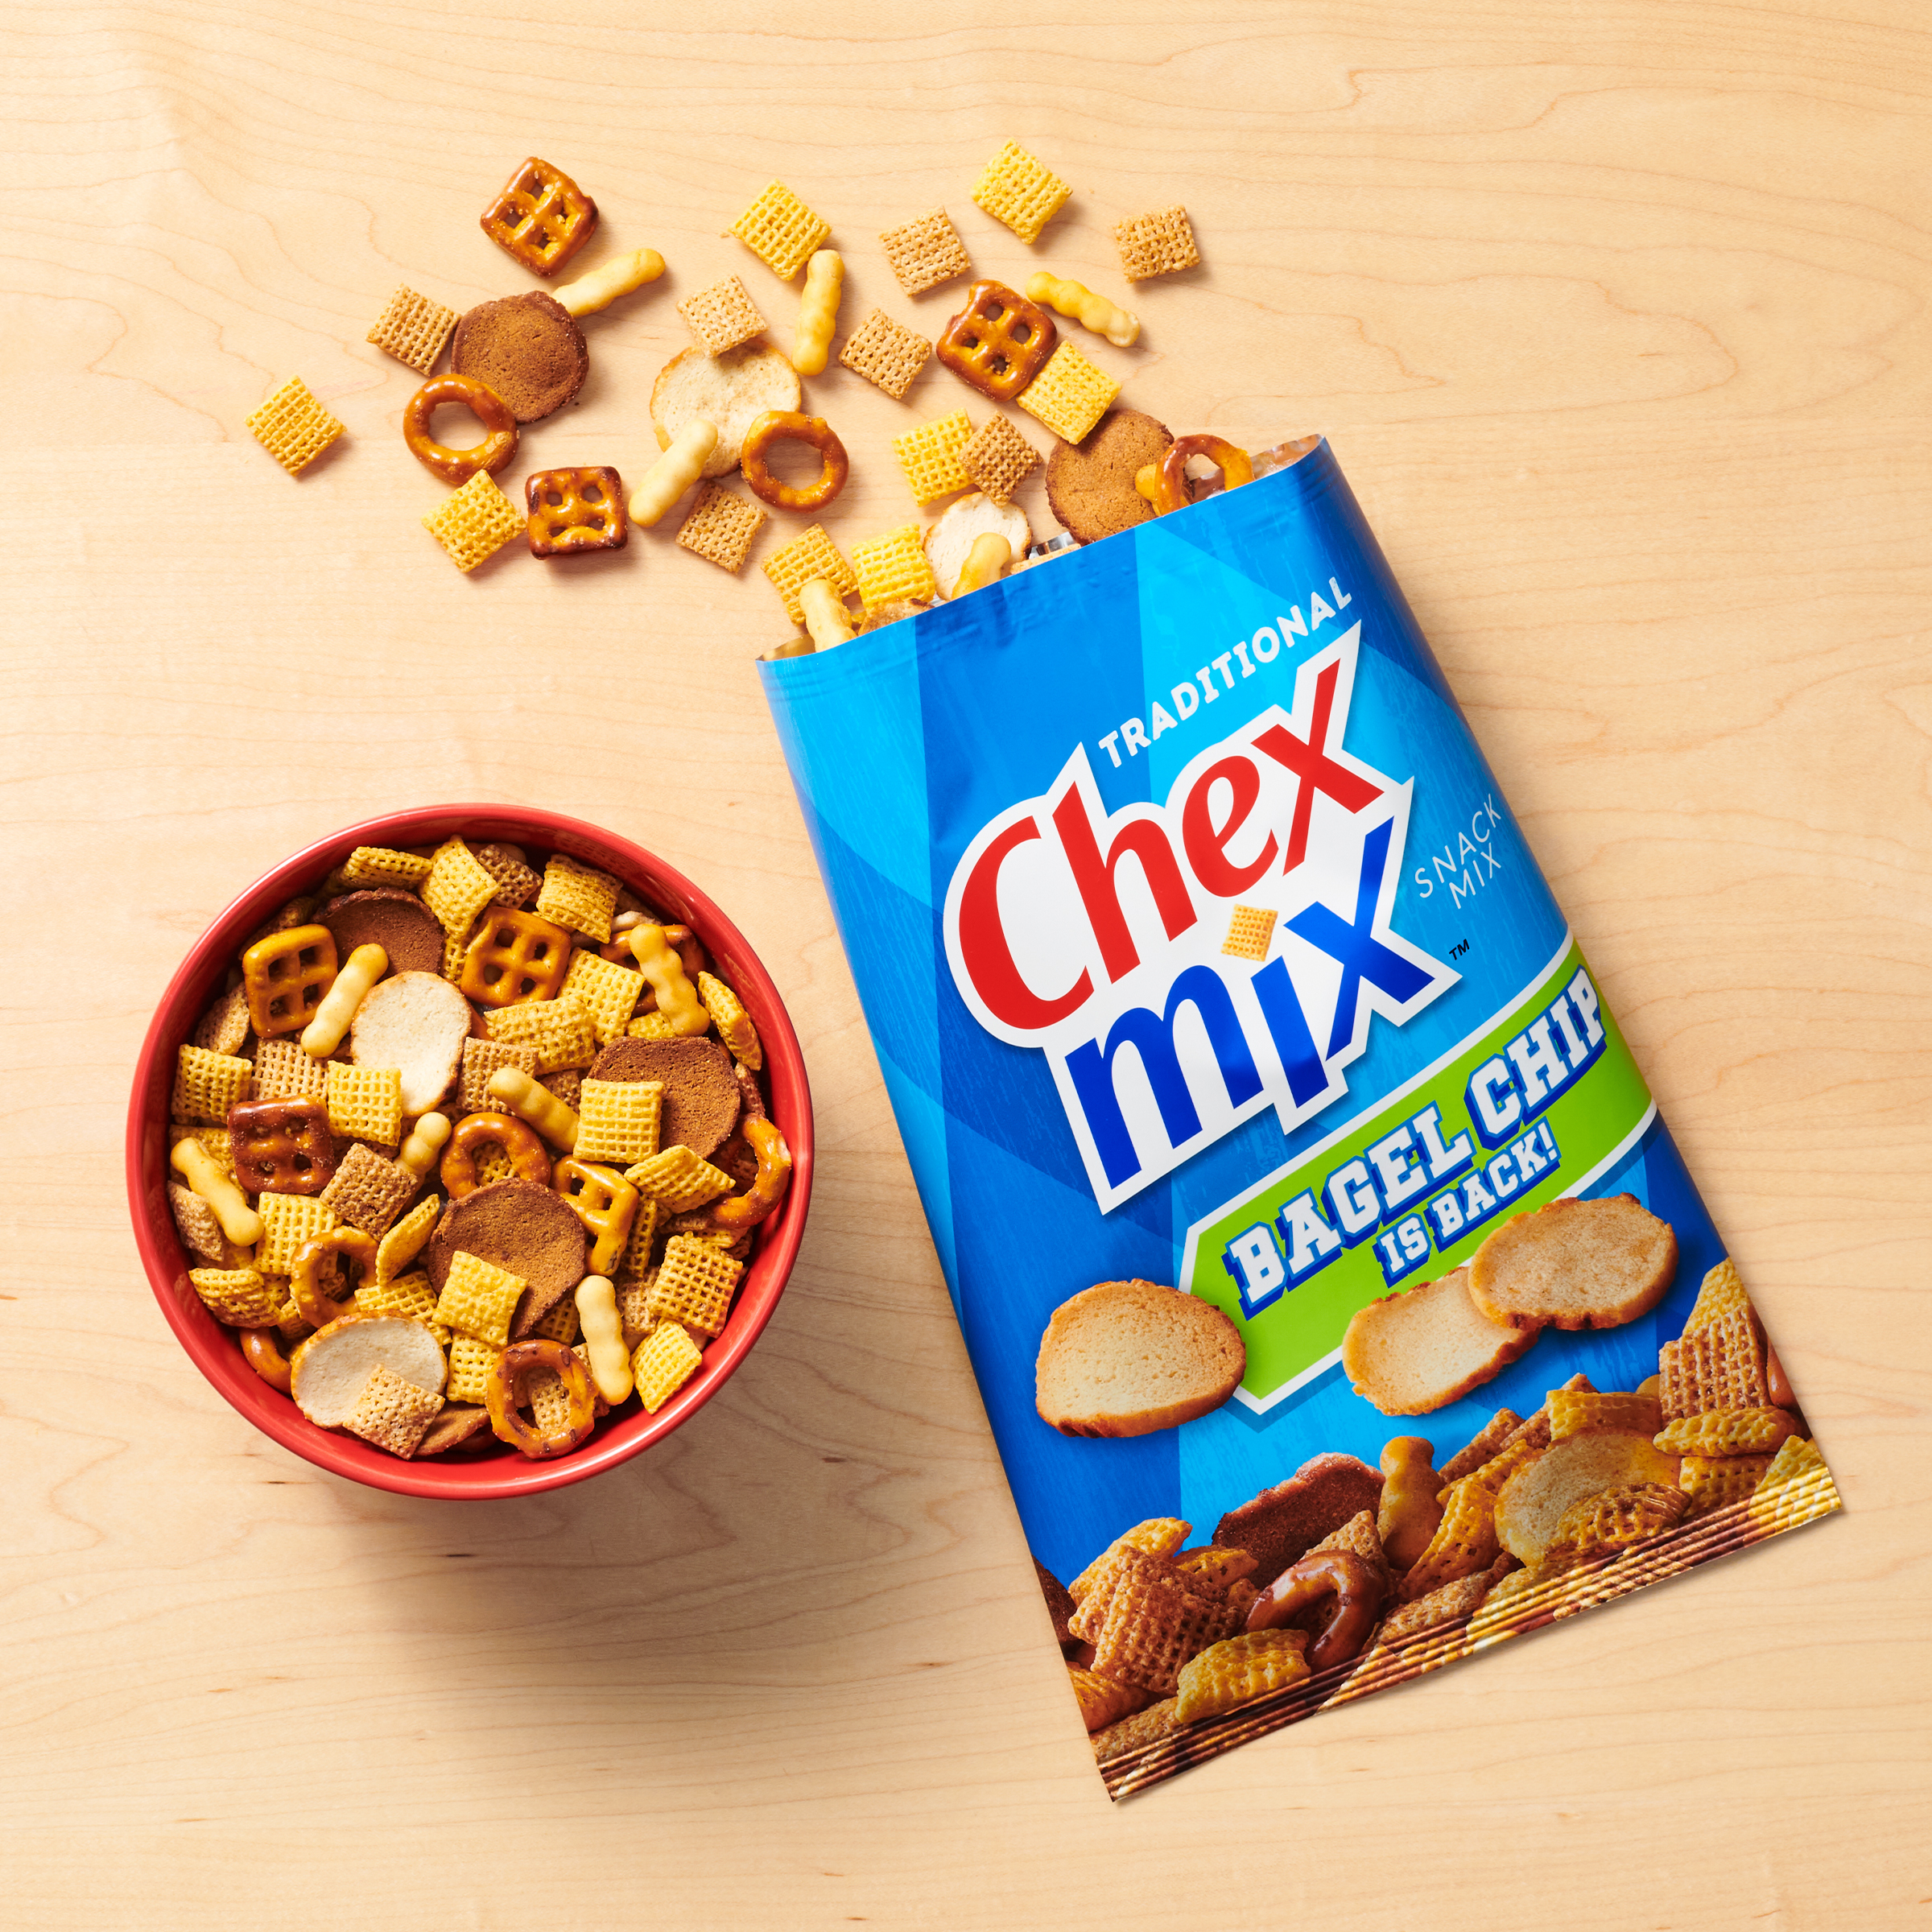 Sir Mix-A-Lot helps Chex Mix